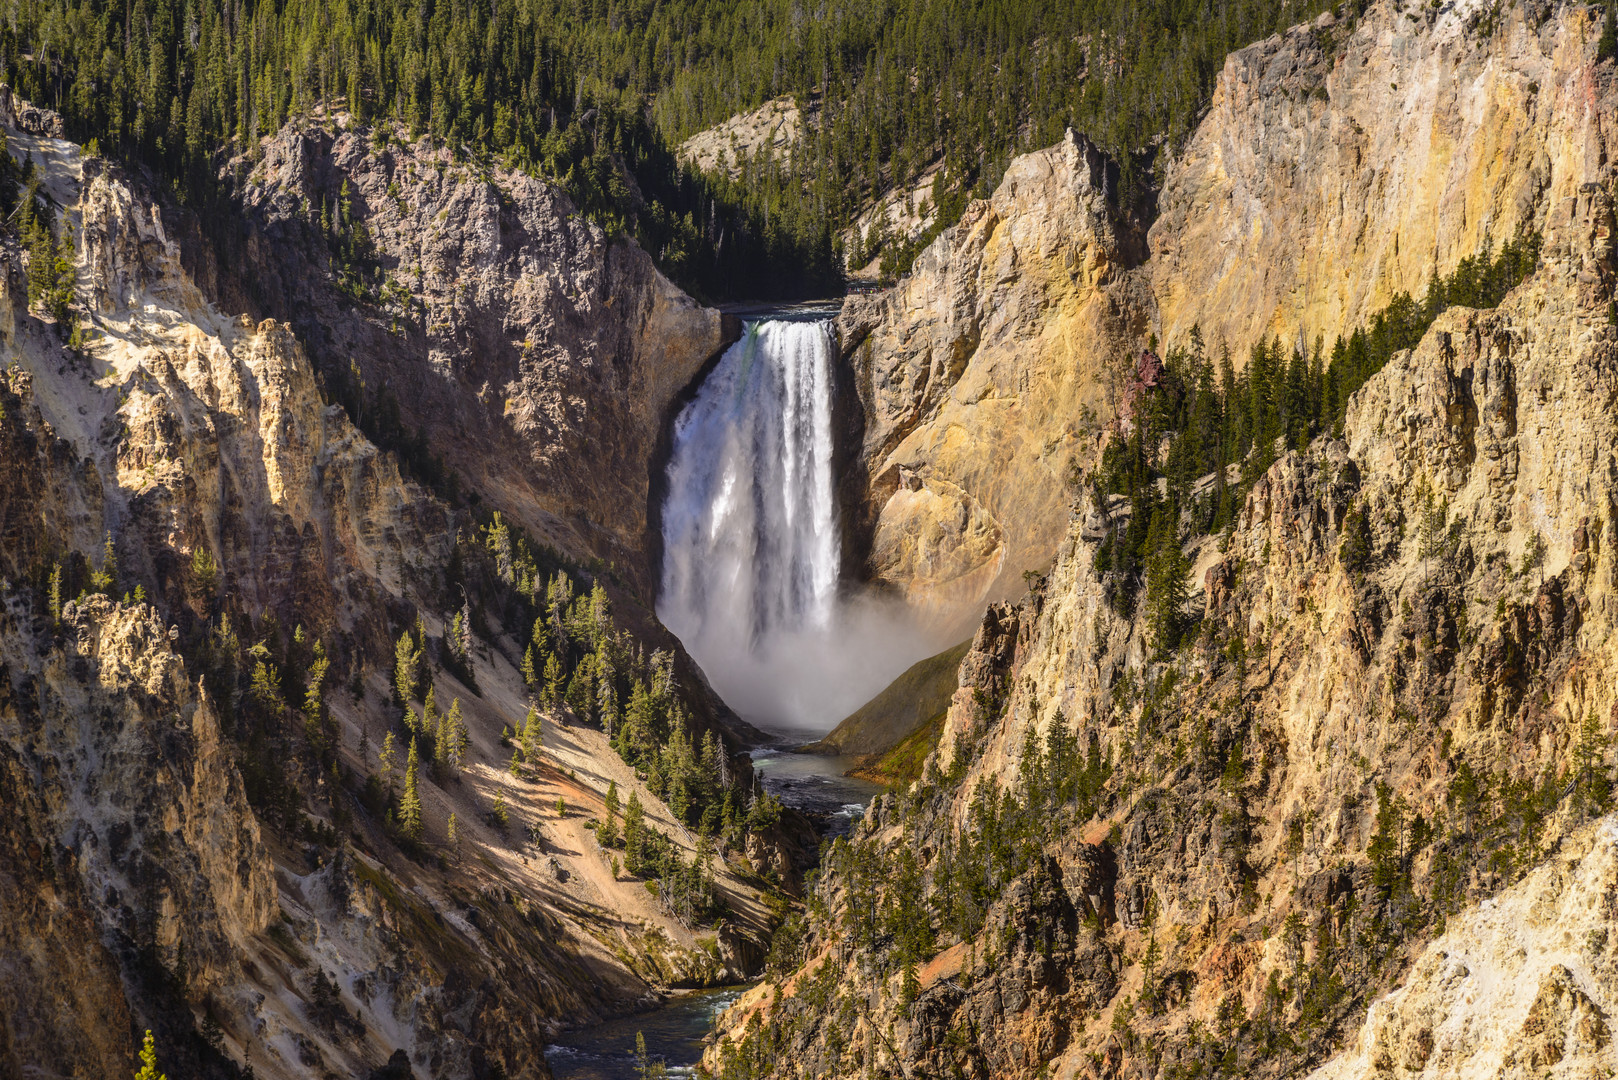 Artist Point, Lower Falls, Grand Canyon of the Yellowstone, Wyoming, USA